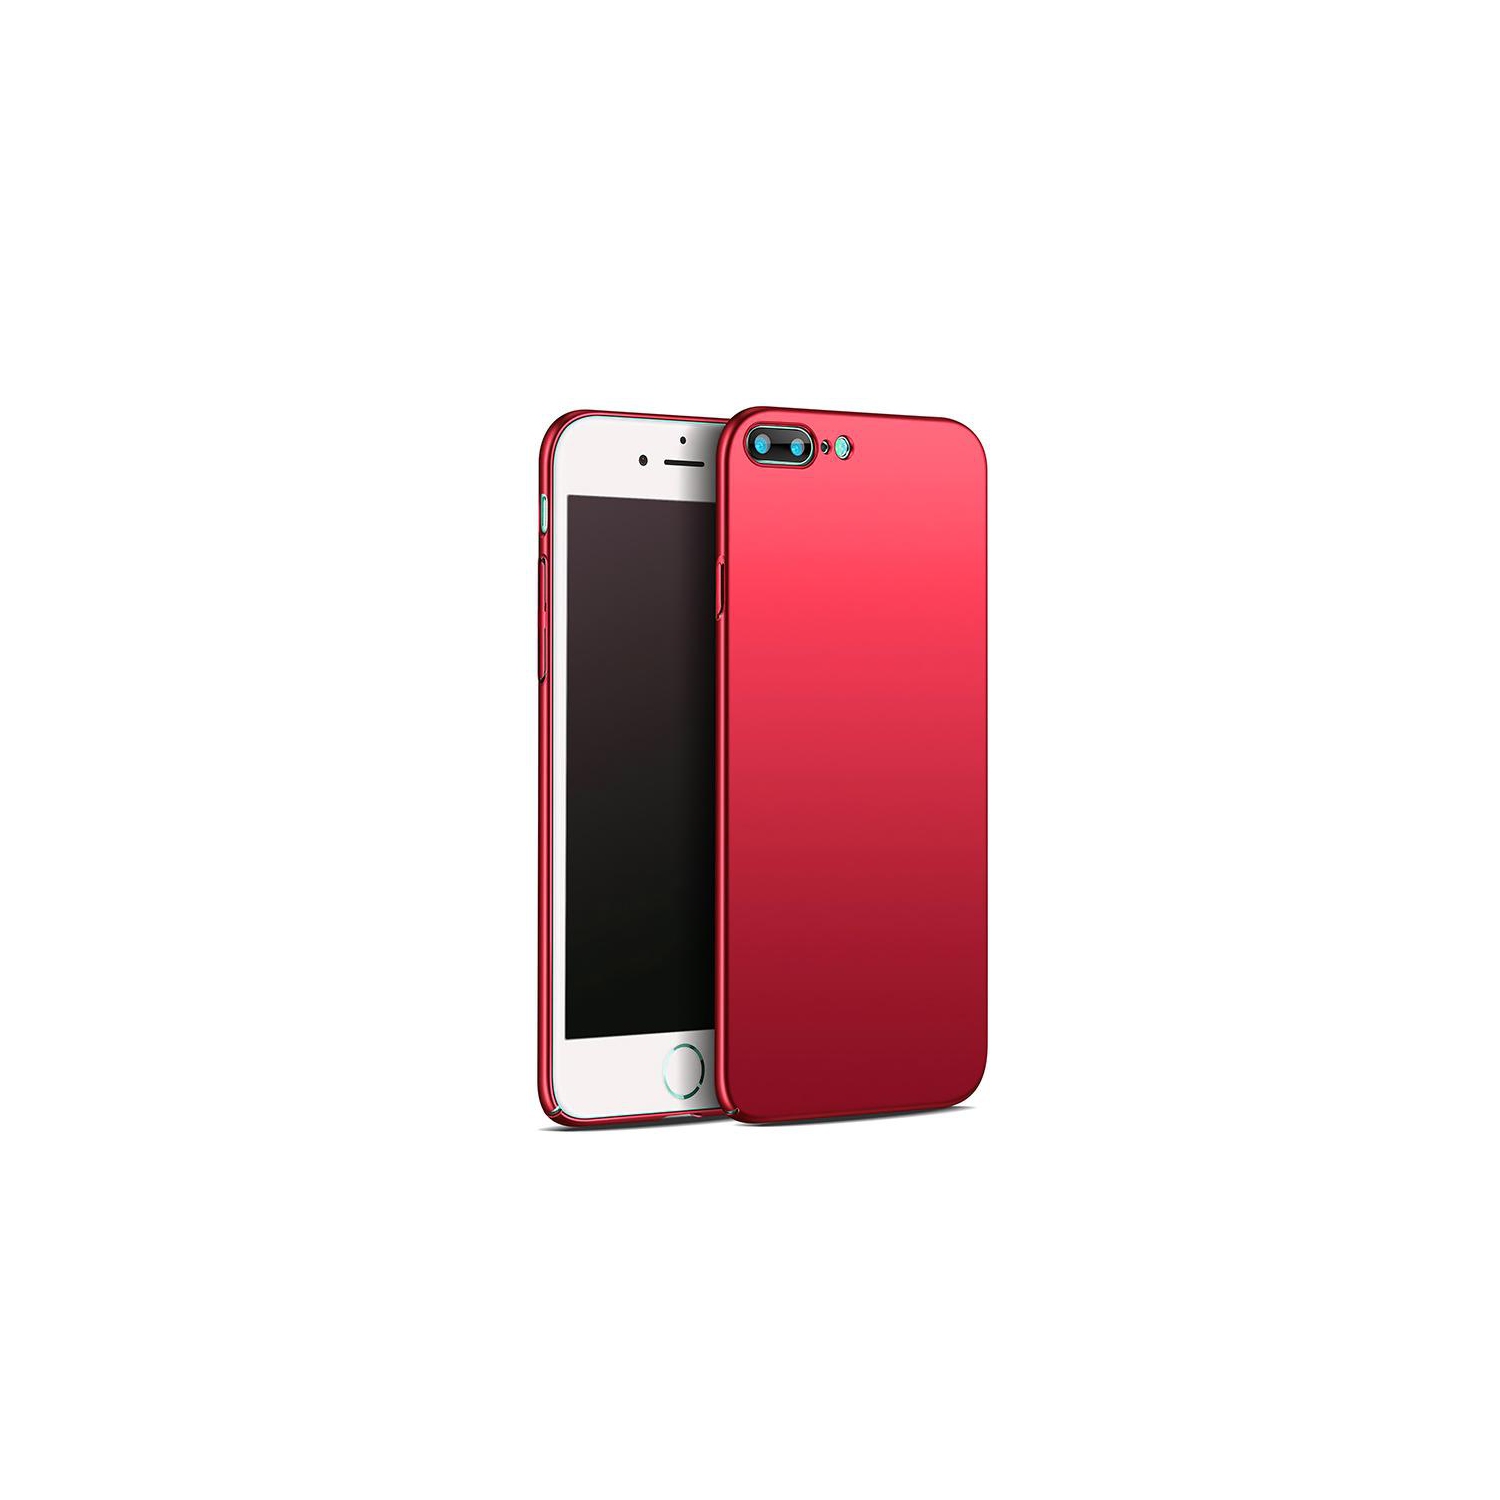 PANDACO Hard Shell Metallic Red Case for iPhone 7 Plus or iPhone 8 Plus